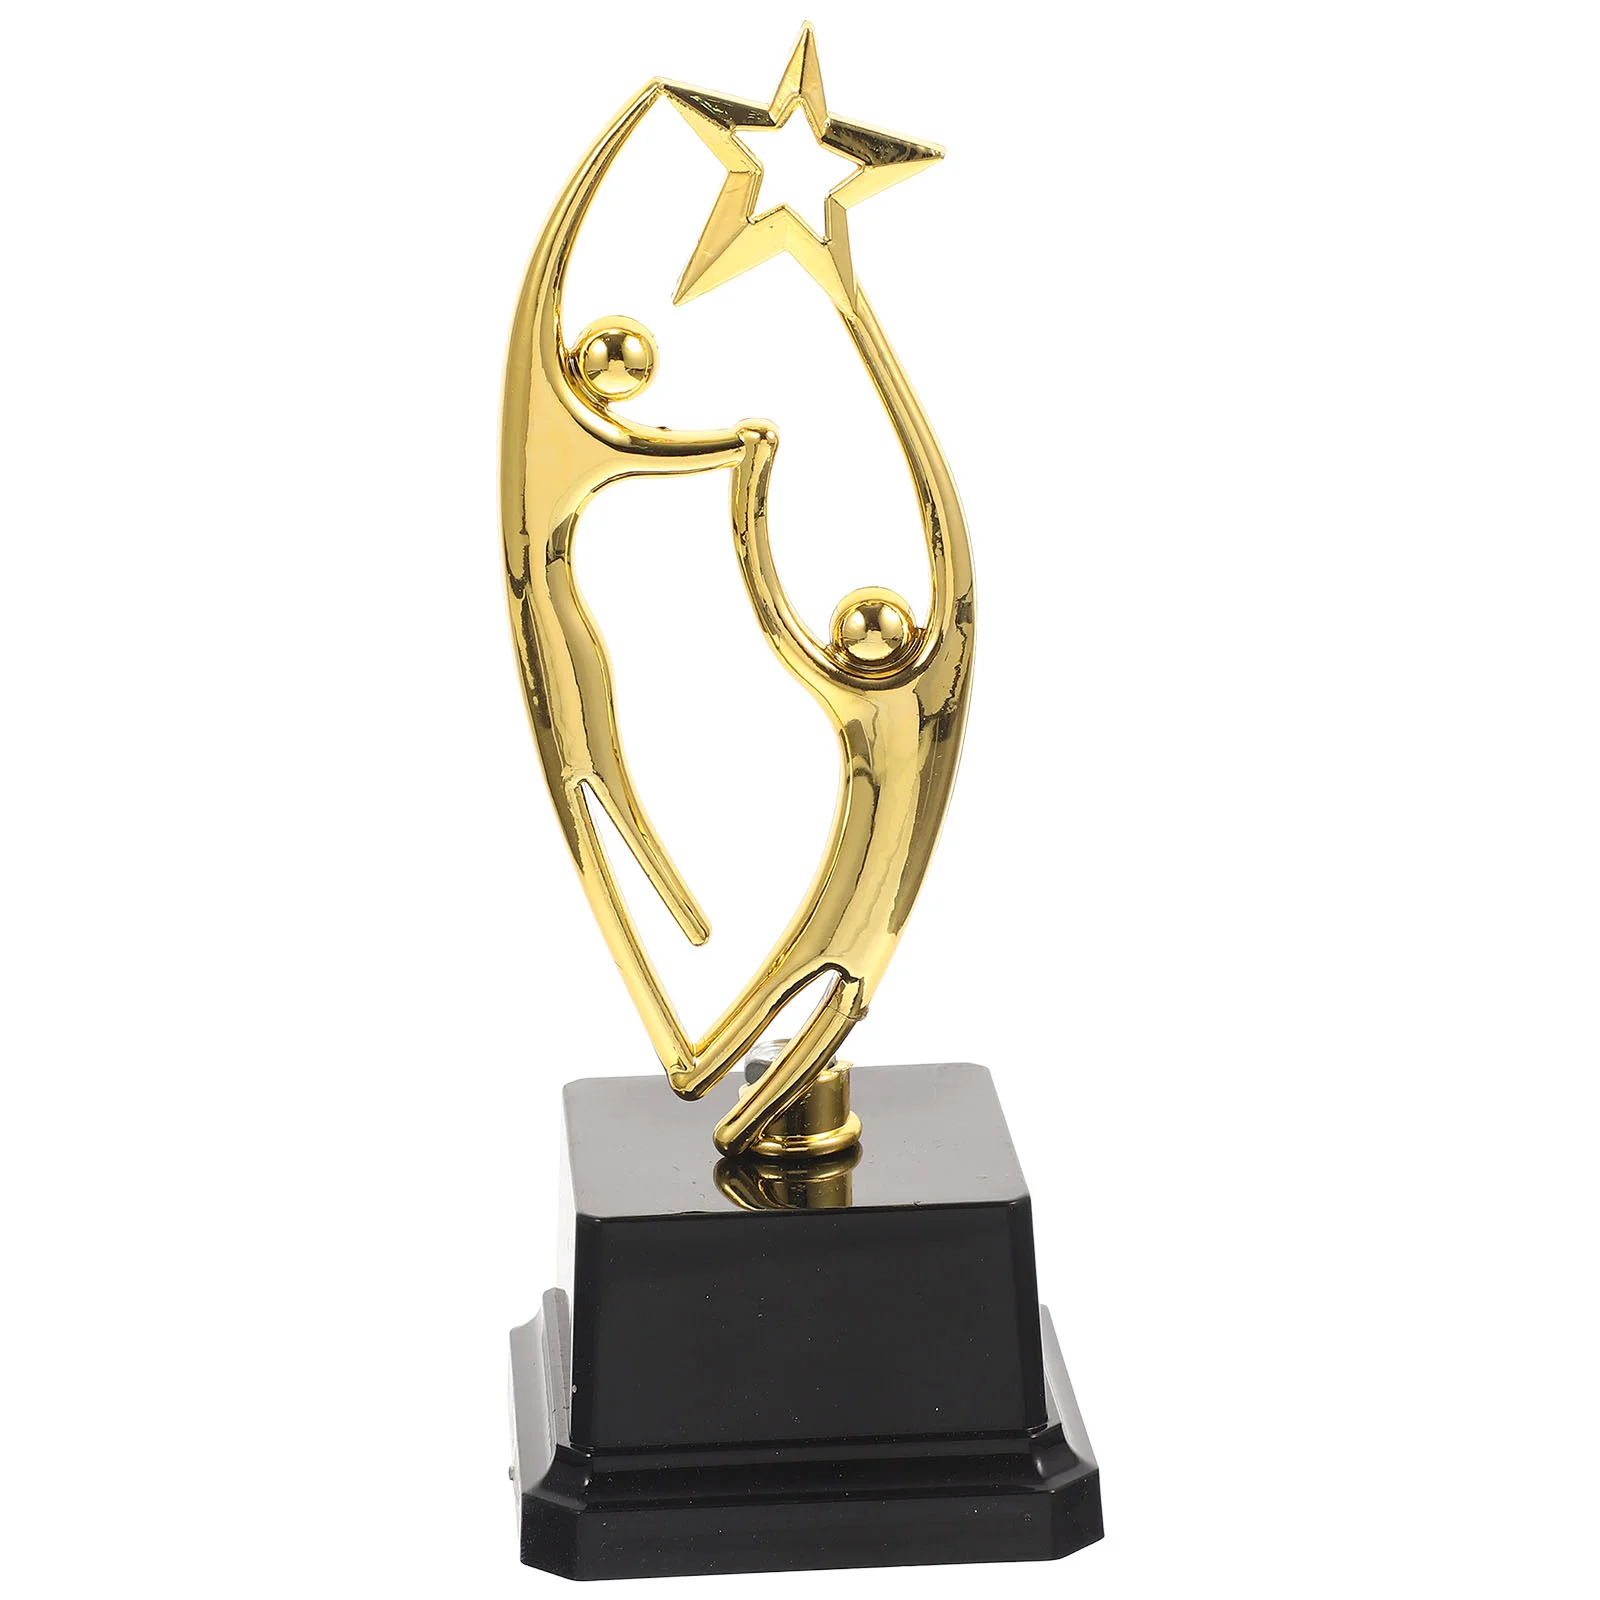 

Trophy Game Prizes for Kids Rewards Toy Sports Meeting Supply Big Trophies Toys Large Kids-parent Award